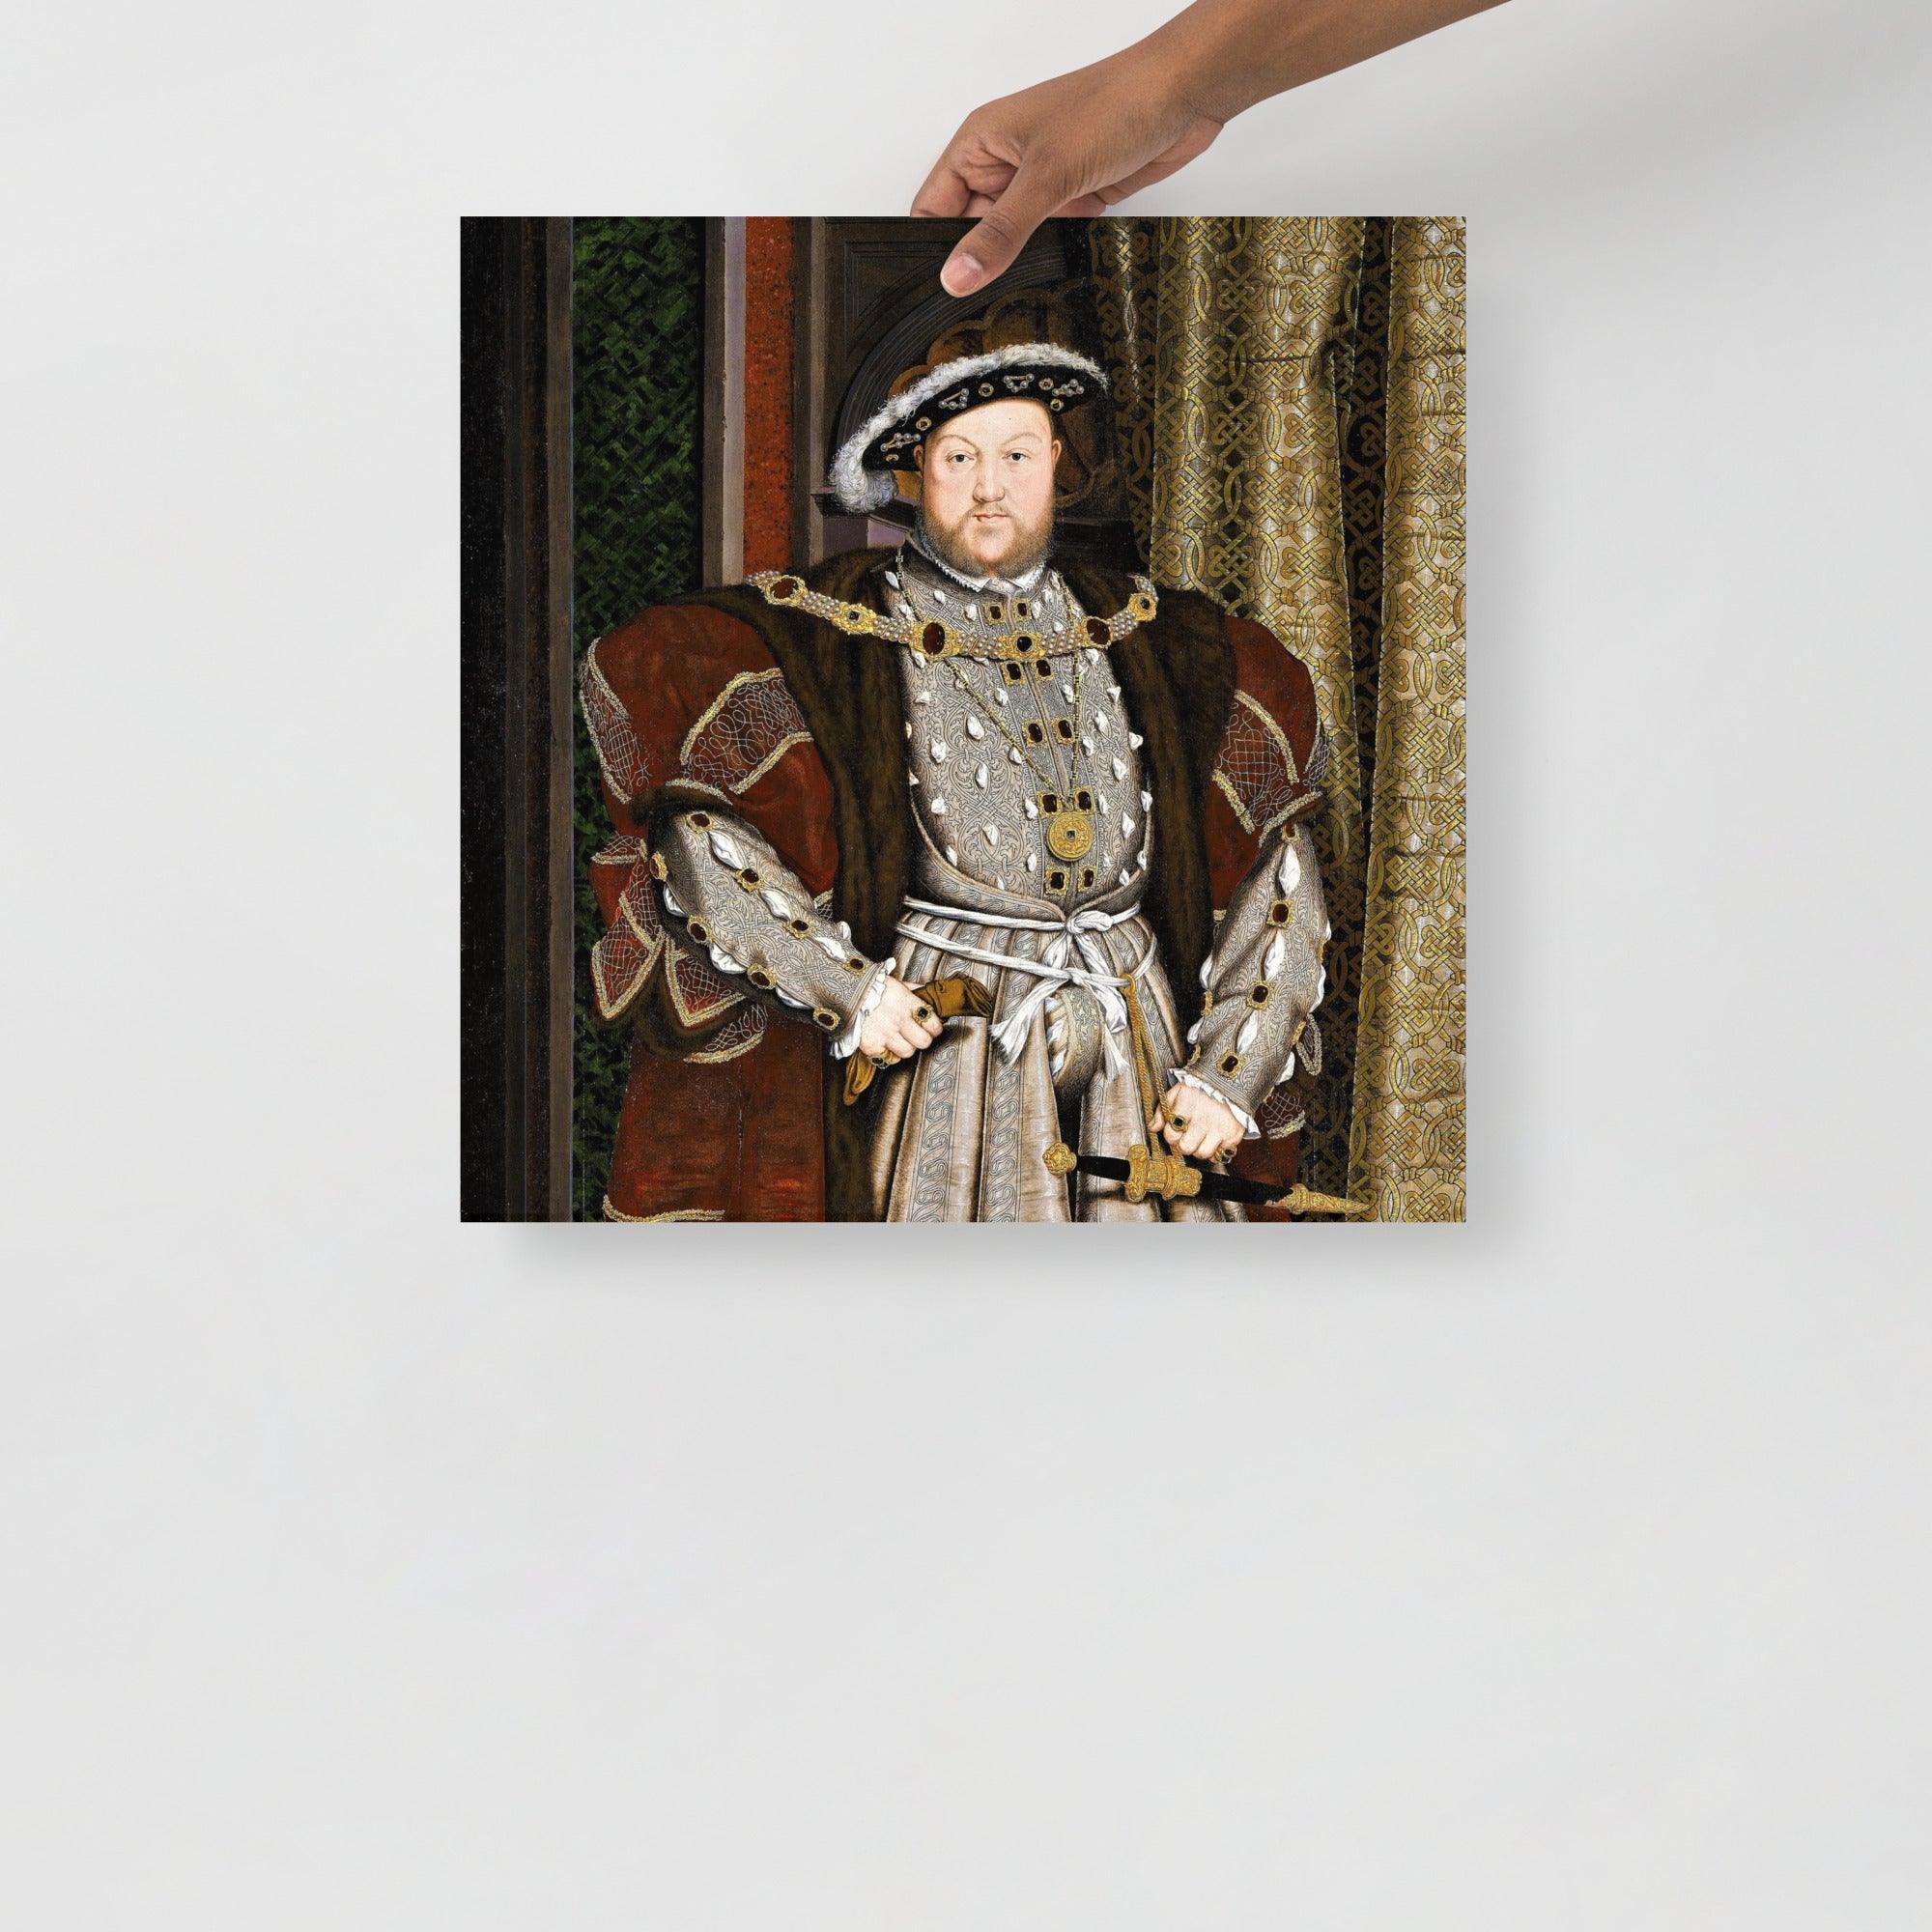 A Henry VIII Of England poster on a plain backdrop in size 18x18”.